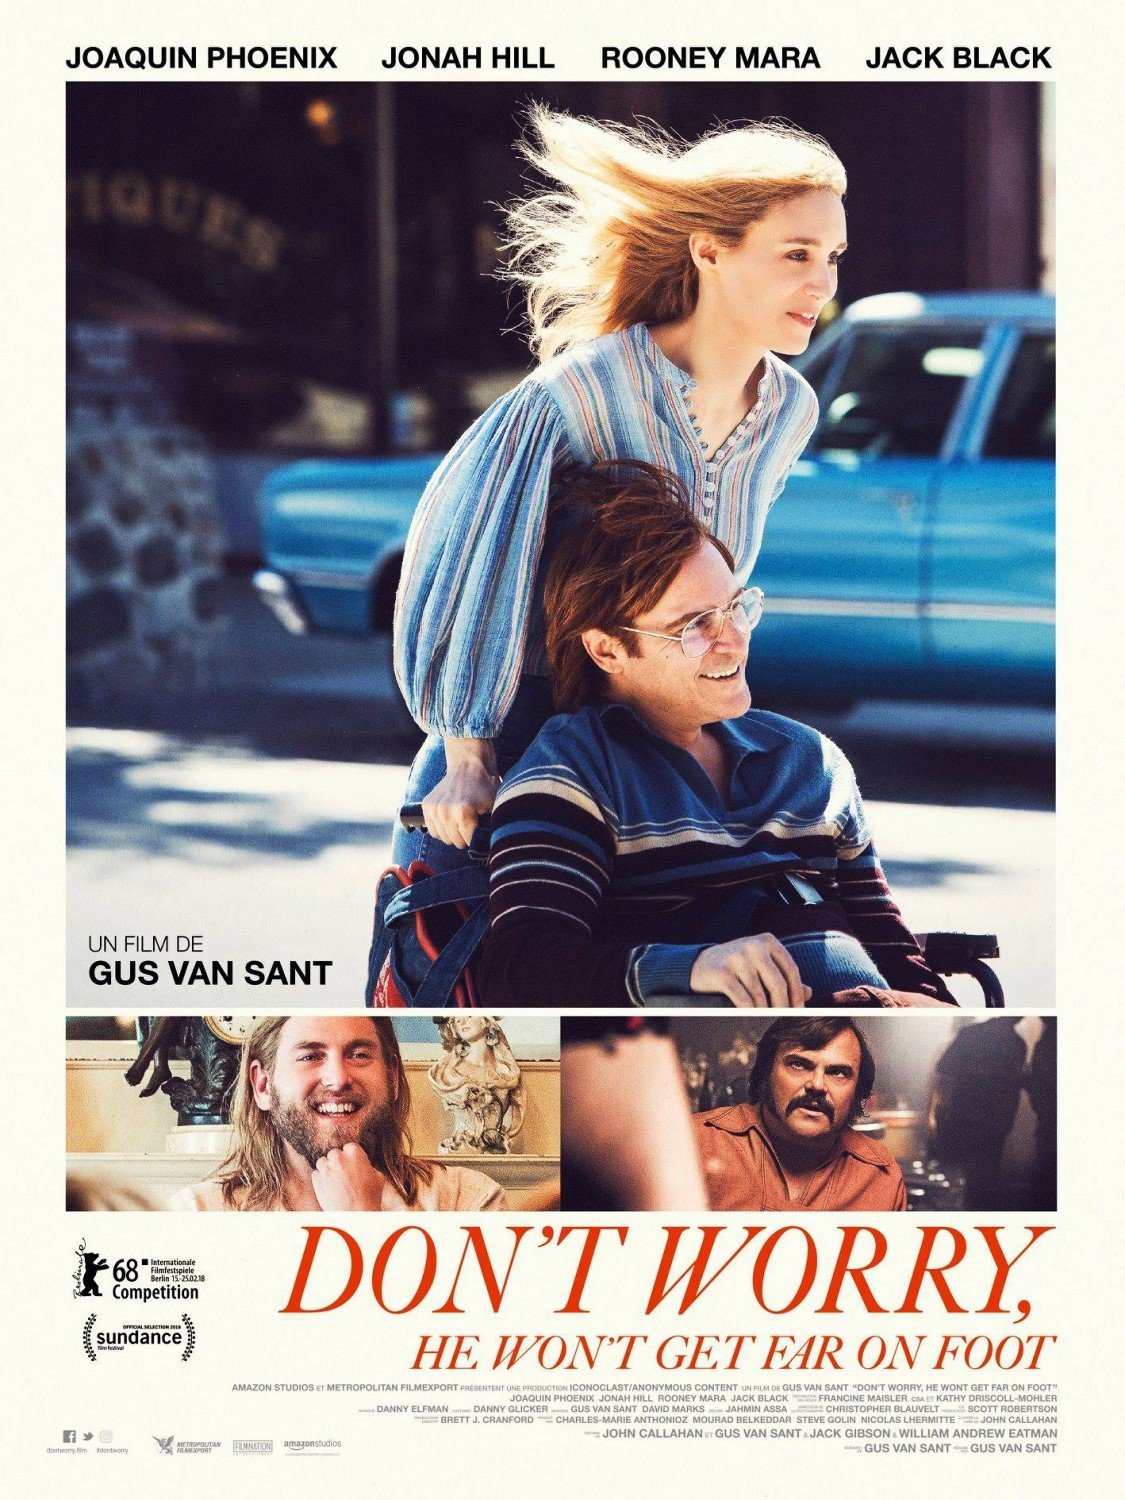 Poster of Amazon Studios' Don't Worry, He Won't Get Far on Foot (2018)